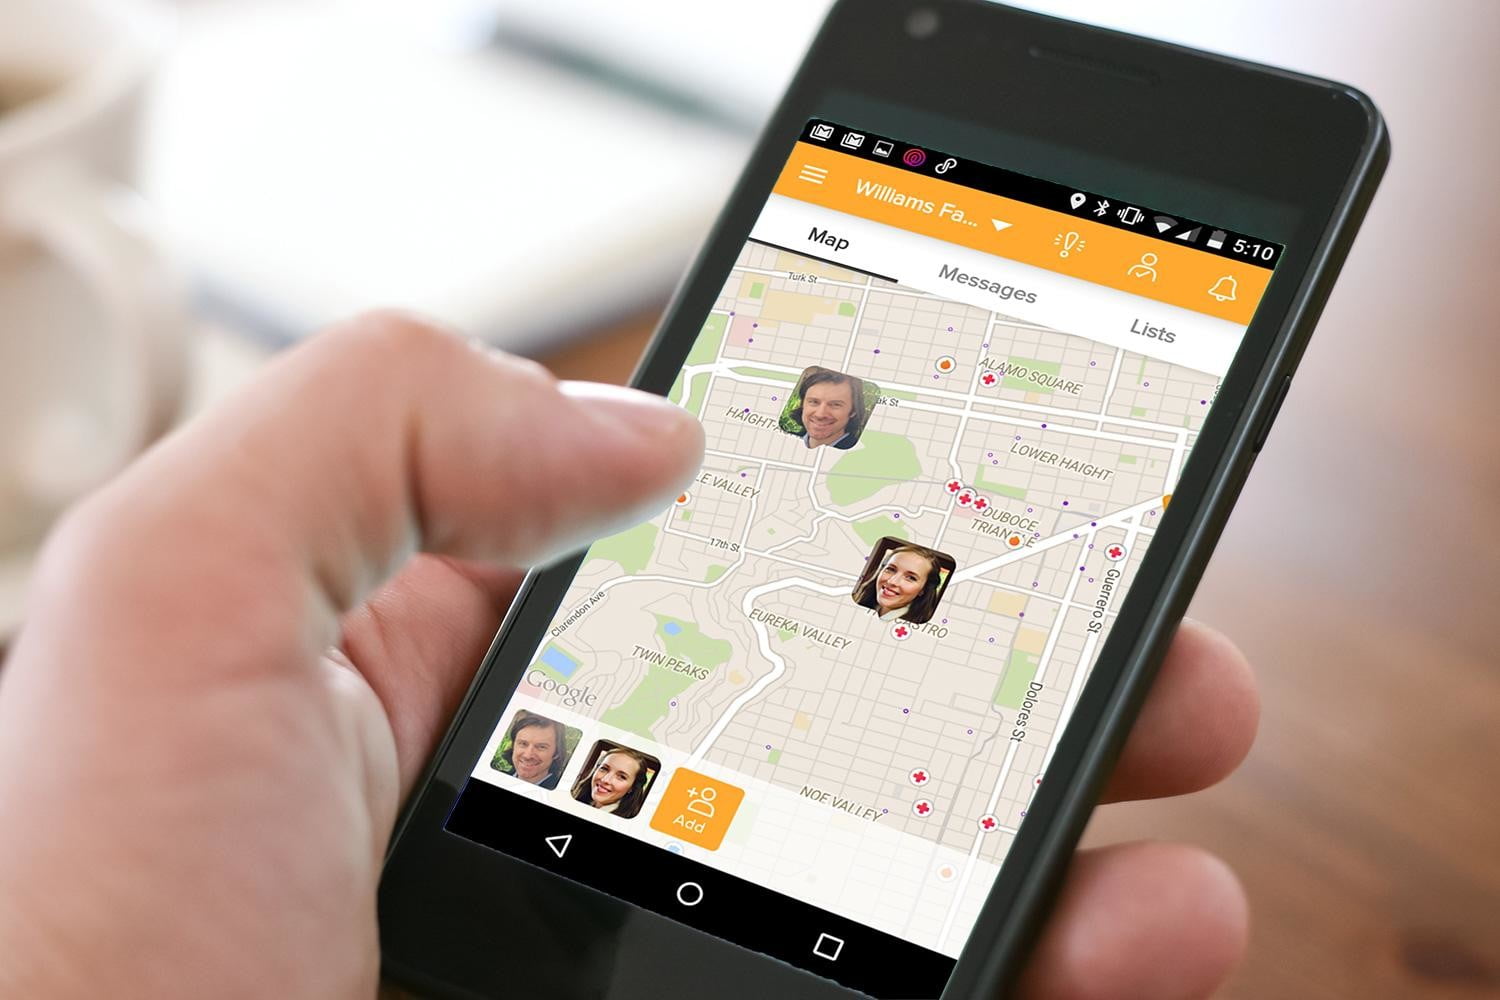 Learn How to Track an Android Phone from this App